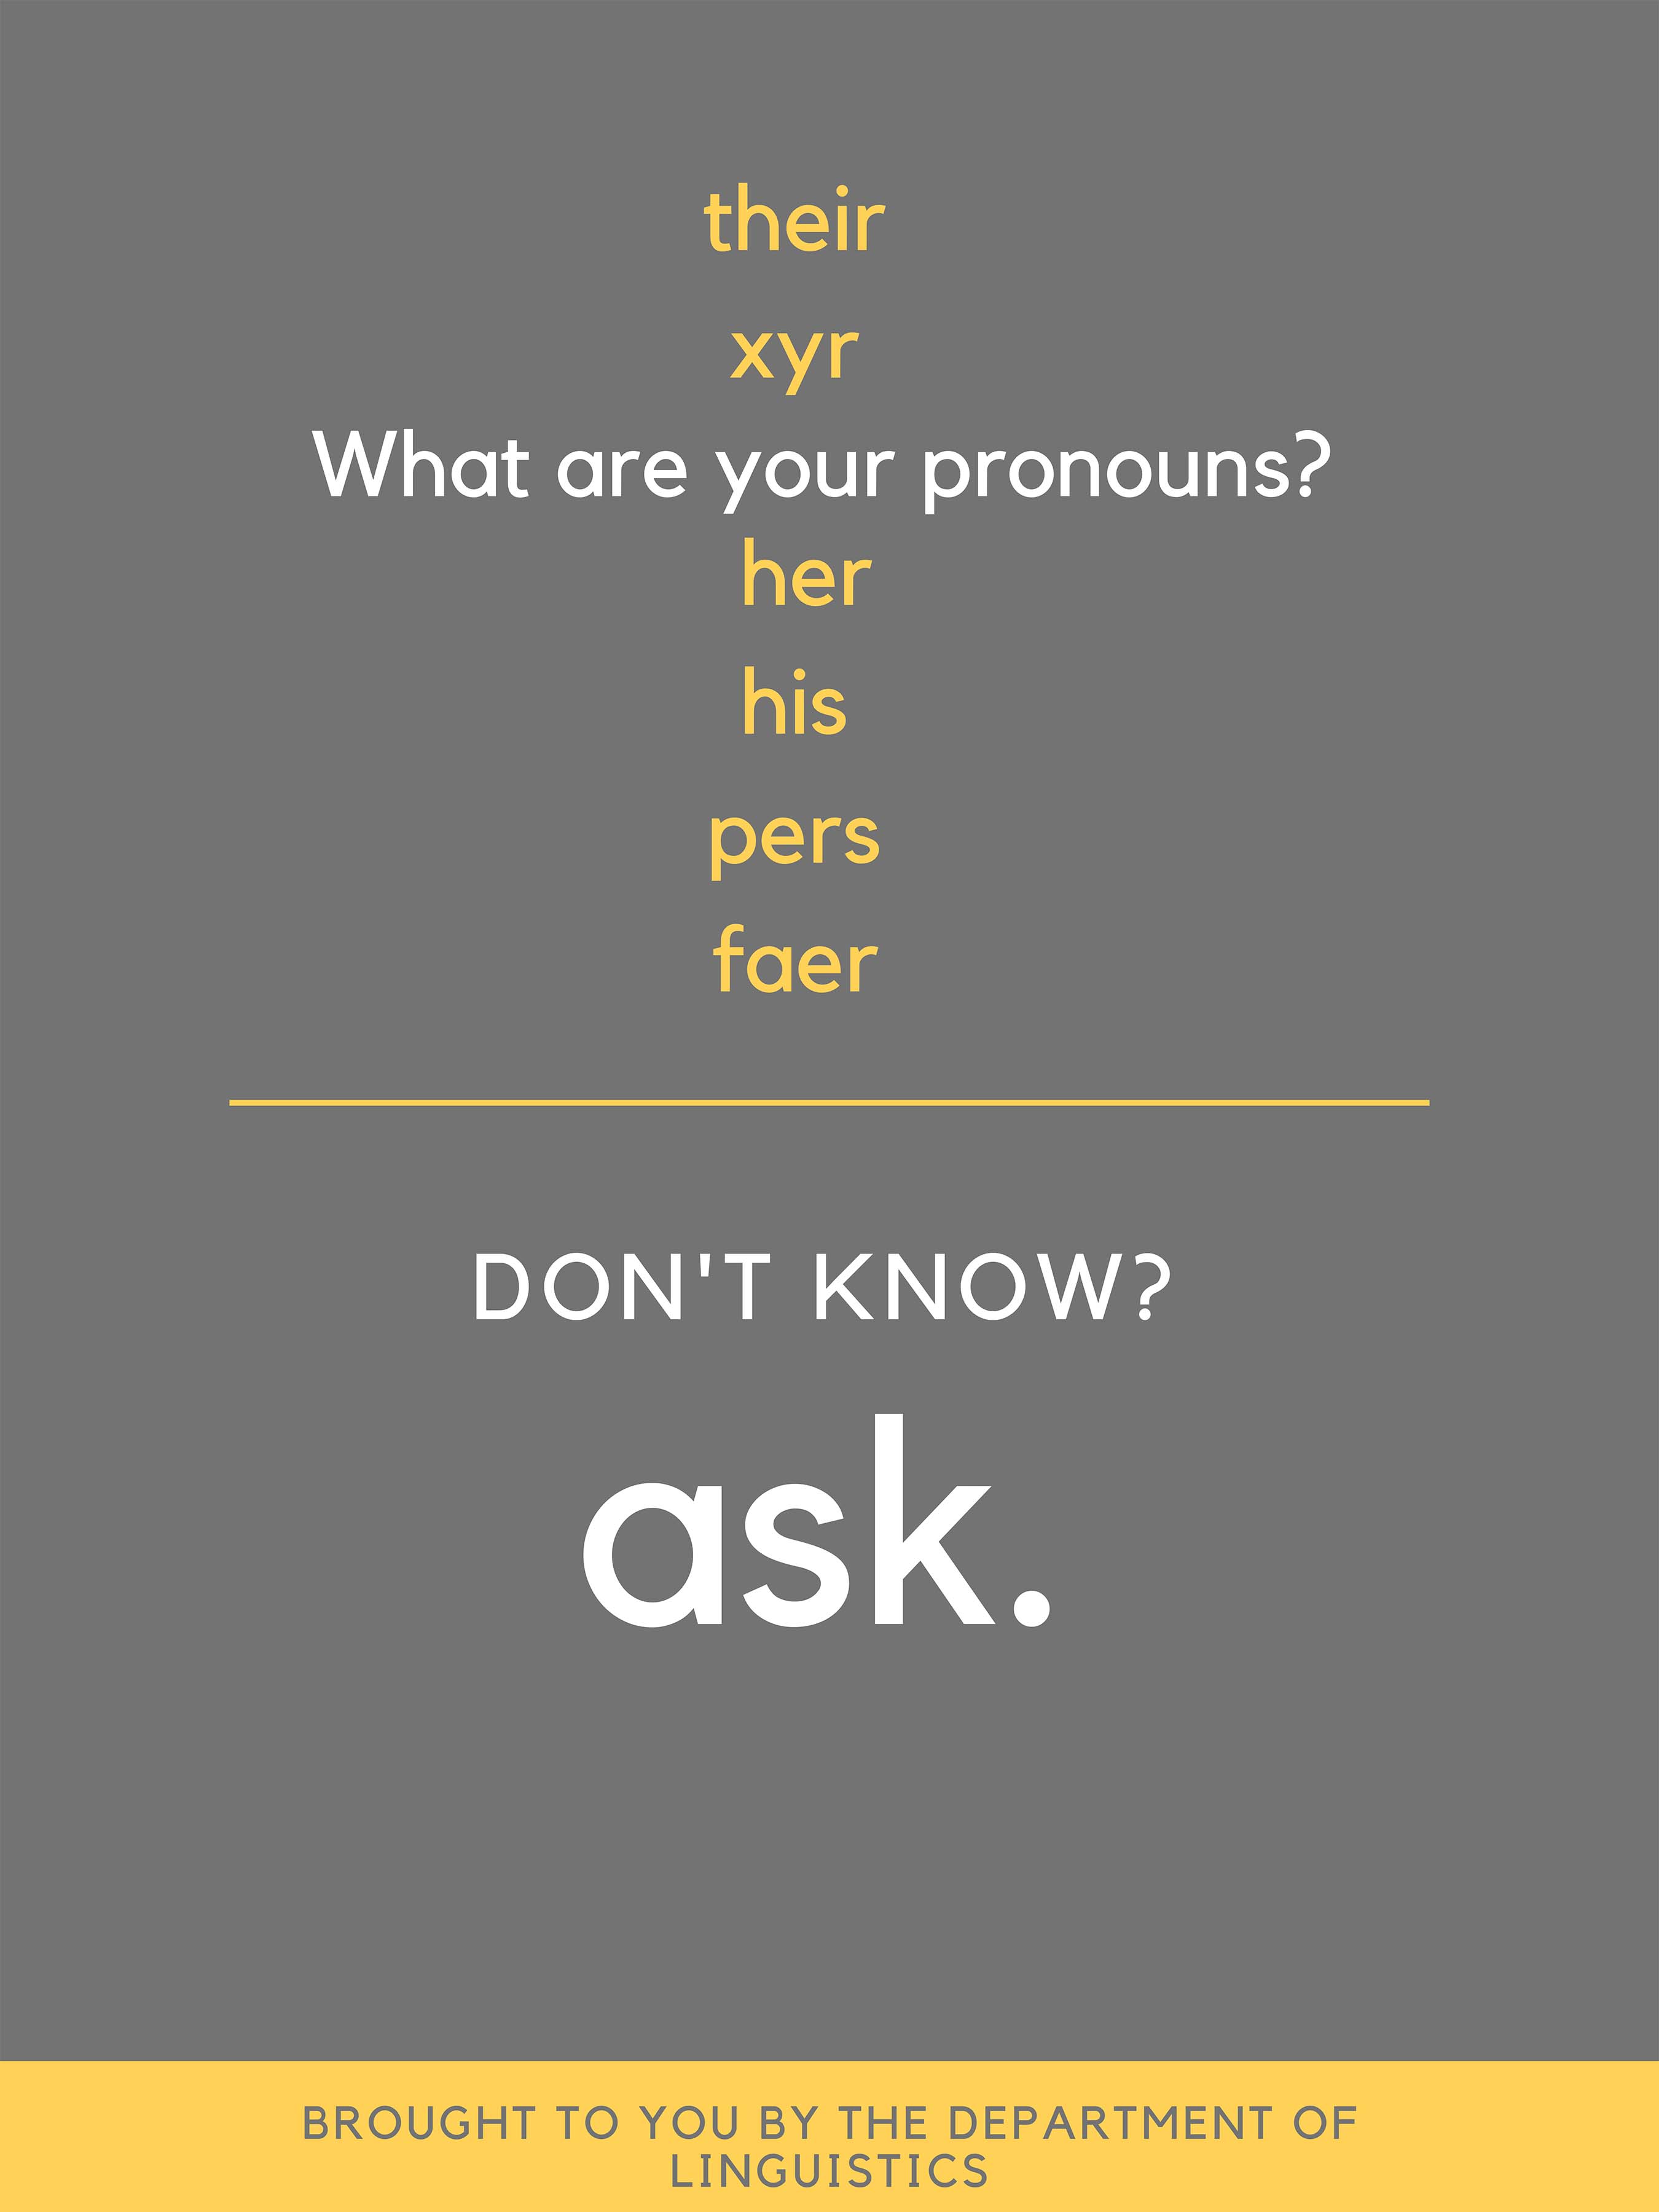 What are your pronouns? Don't know? Ask. Click on image to see full description.